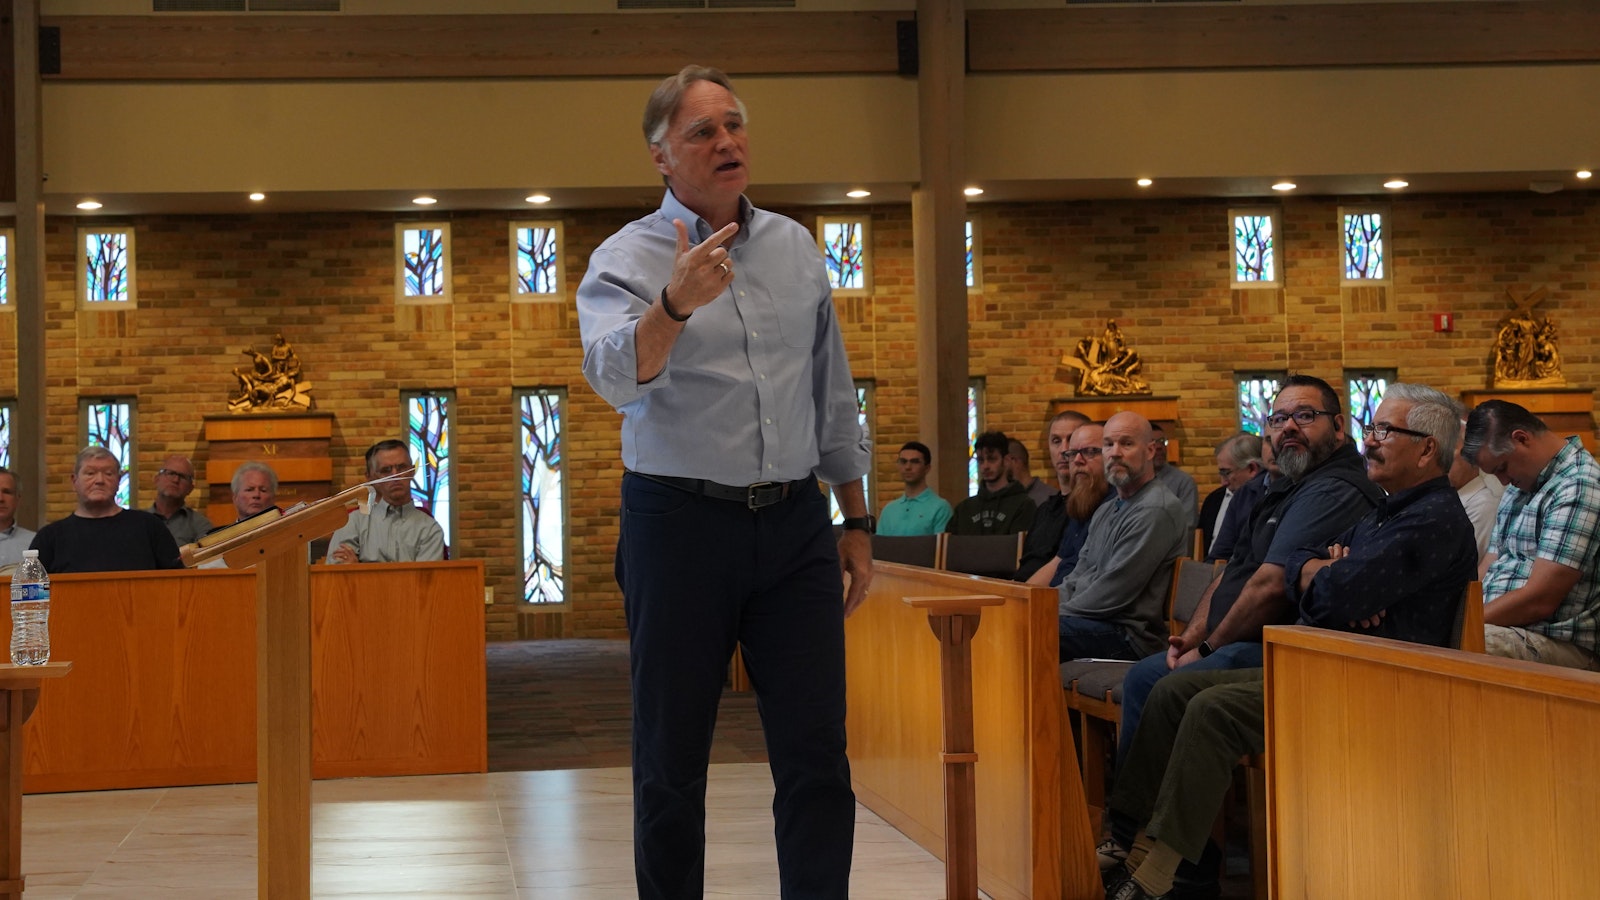 Peter Herbeck of Renewal Ministries encourages men to live sacramental lives, bringing their families to Mass and being holy examples of Christian masculinity for their families.